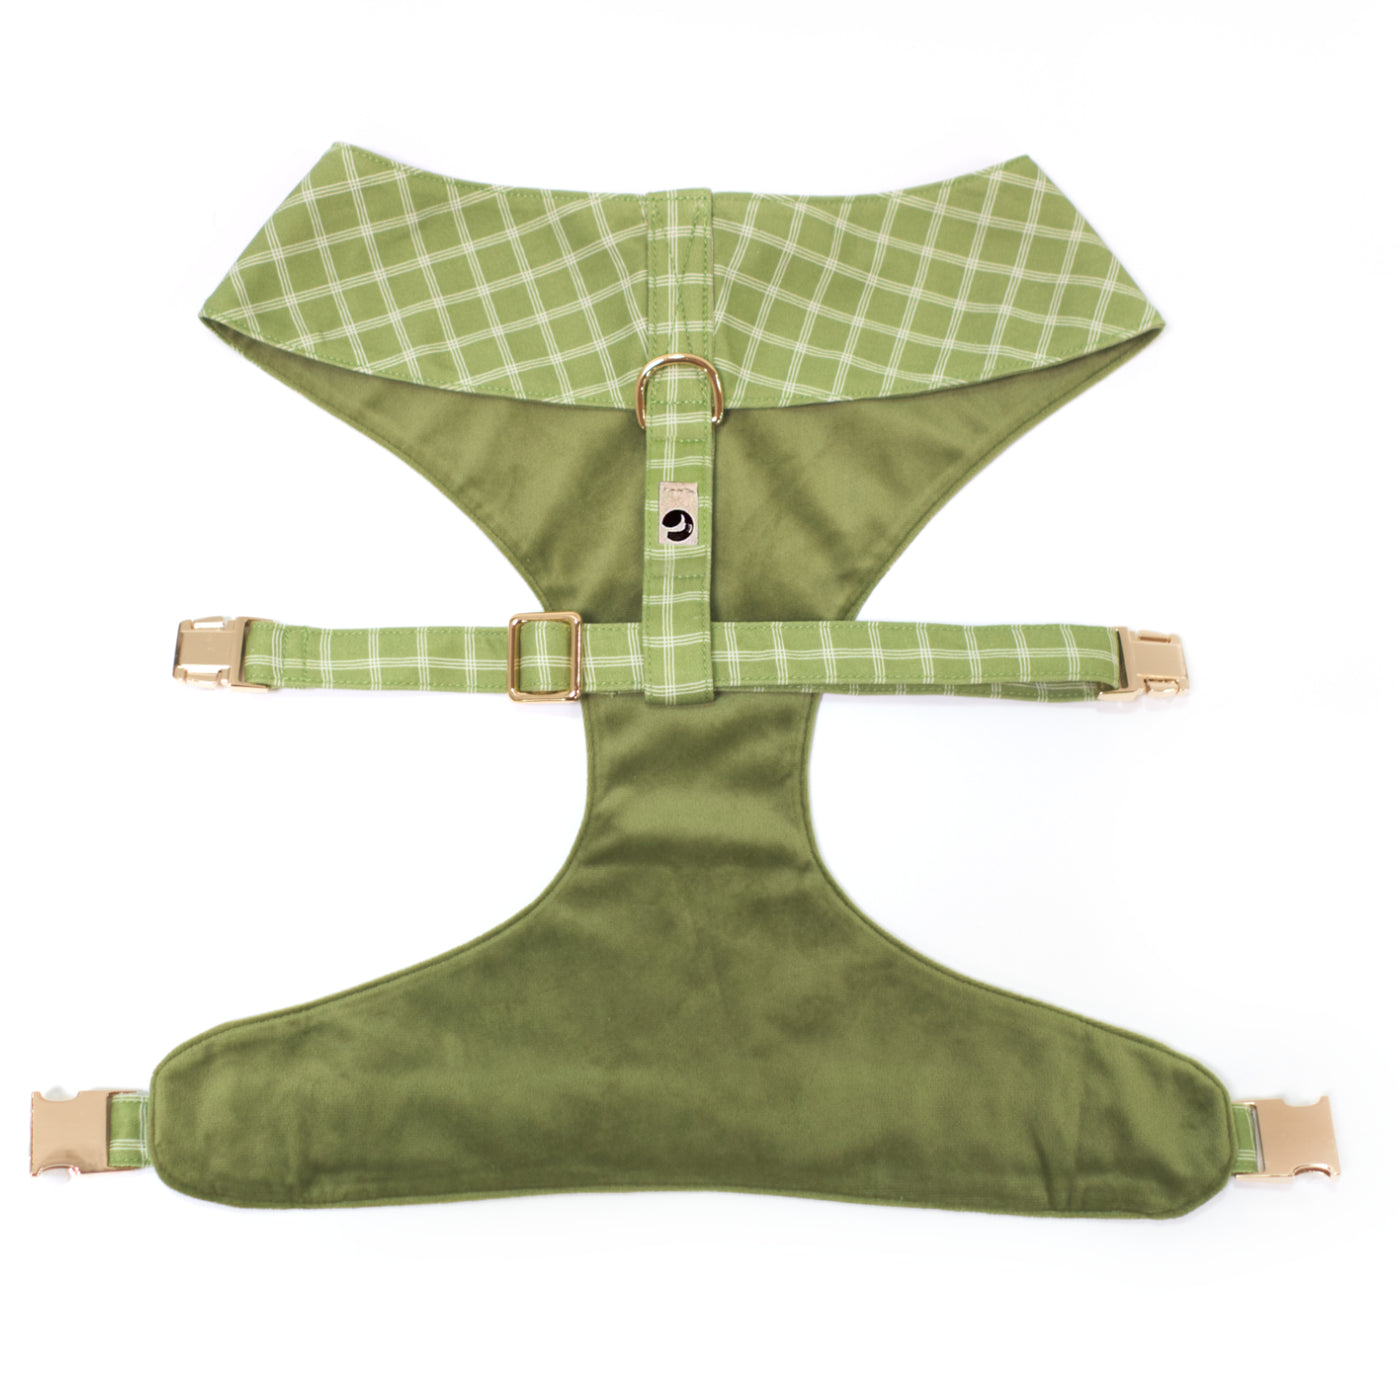 Windowpane plaid and velvet dog harness in meadow green shown from top/back